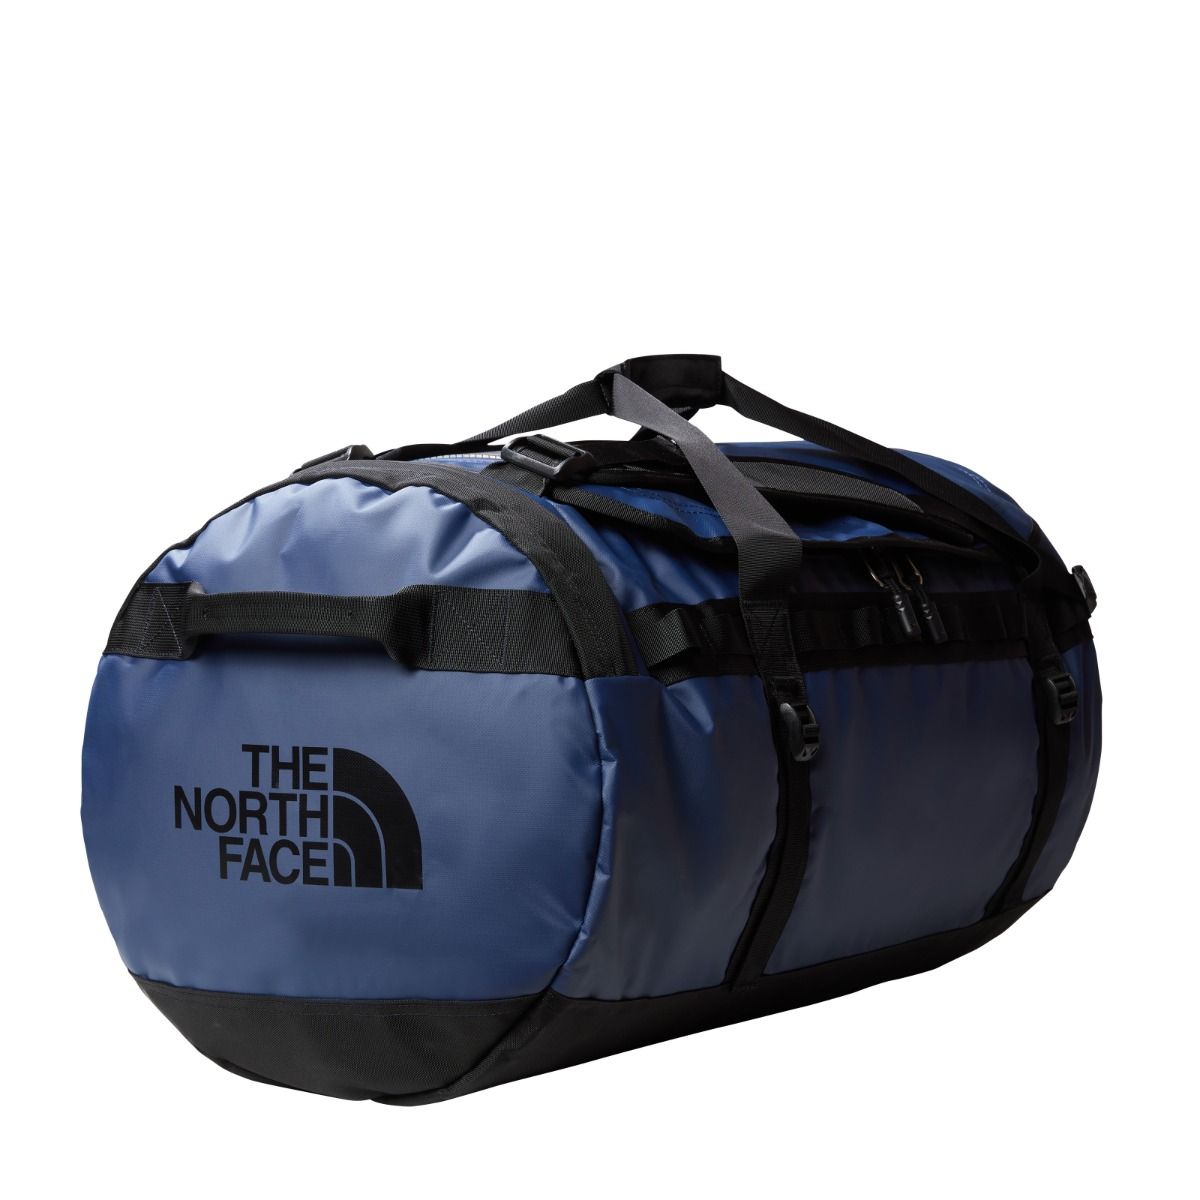 The North Face BASE CAMP DUFFEL LARGE 95L-0 Einmalige Grösse von The North Face